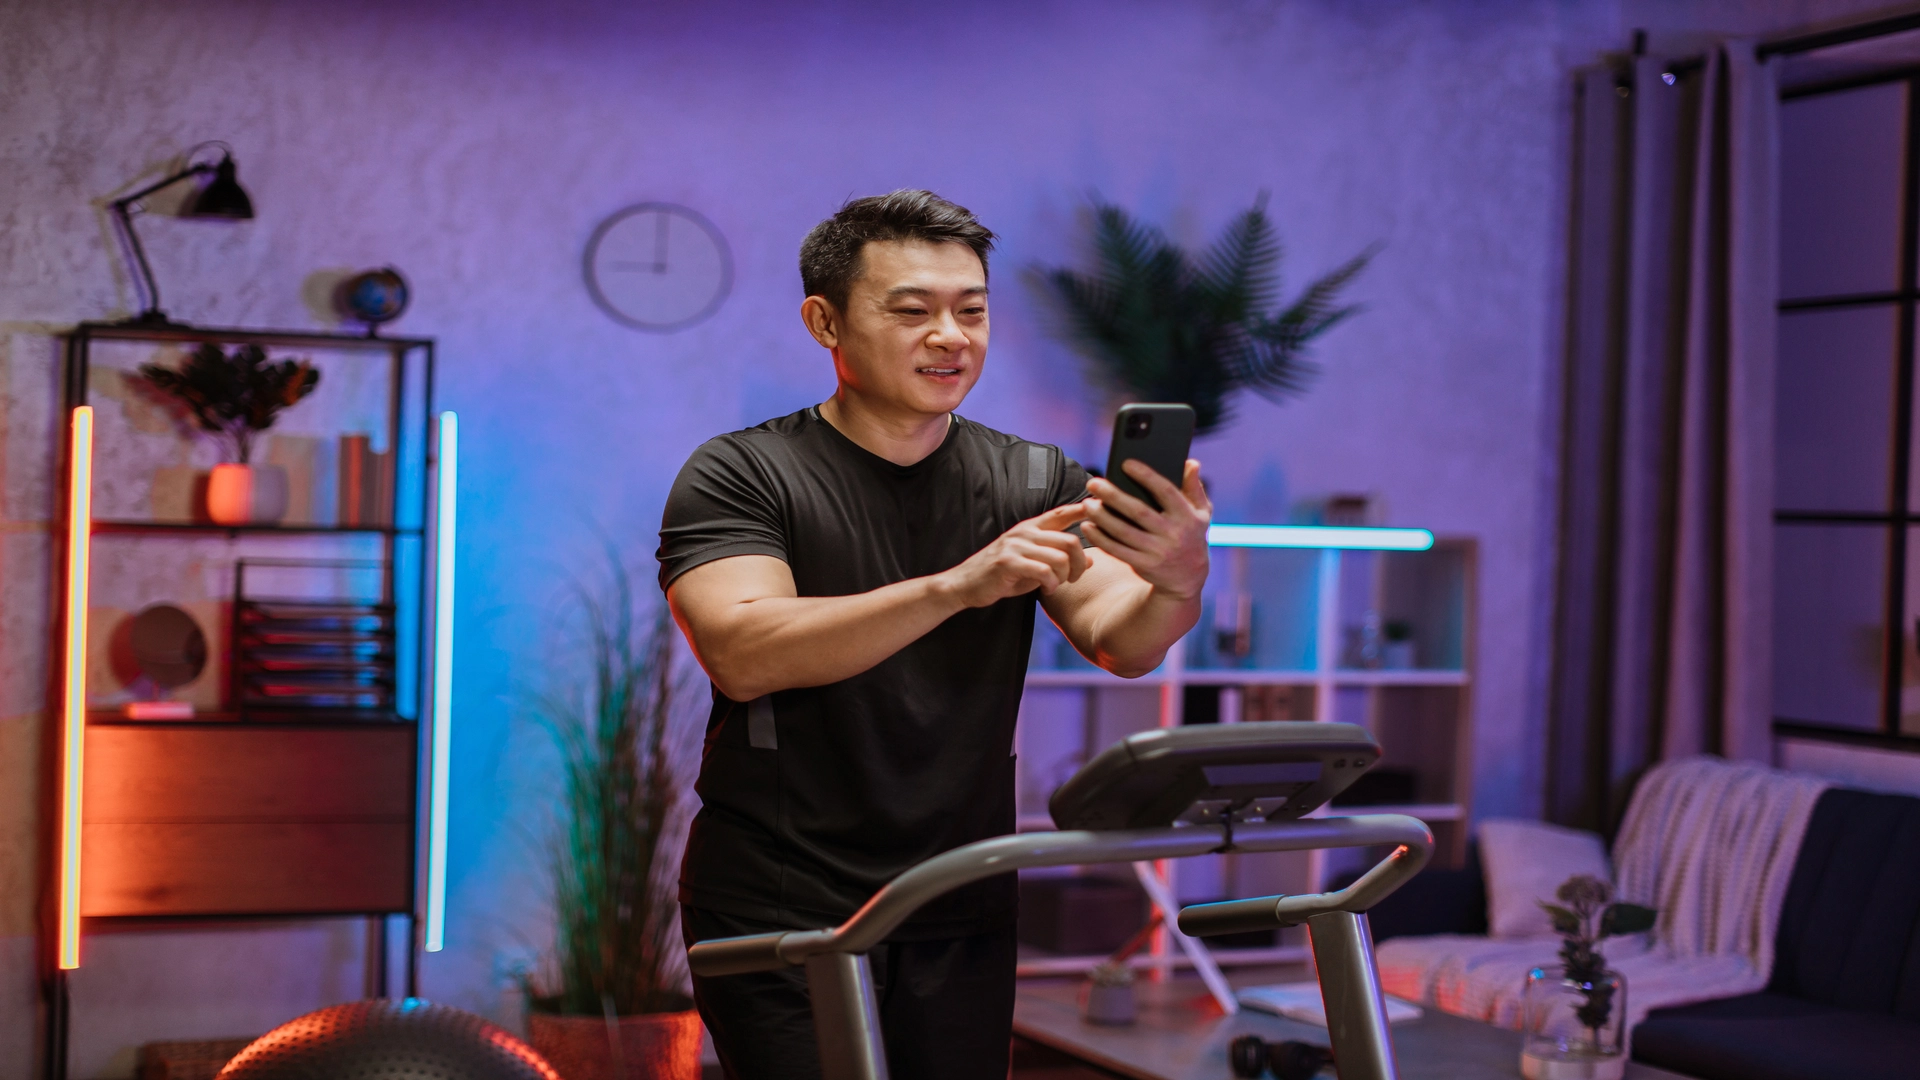 A man using his phone while doing exercise in a home gyms decorate wit elegant lights